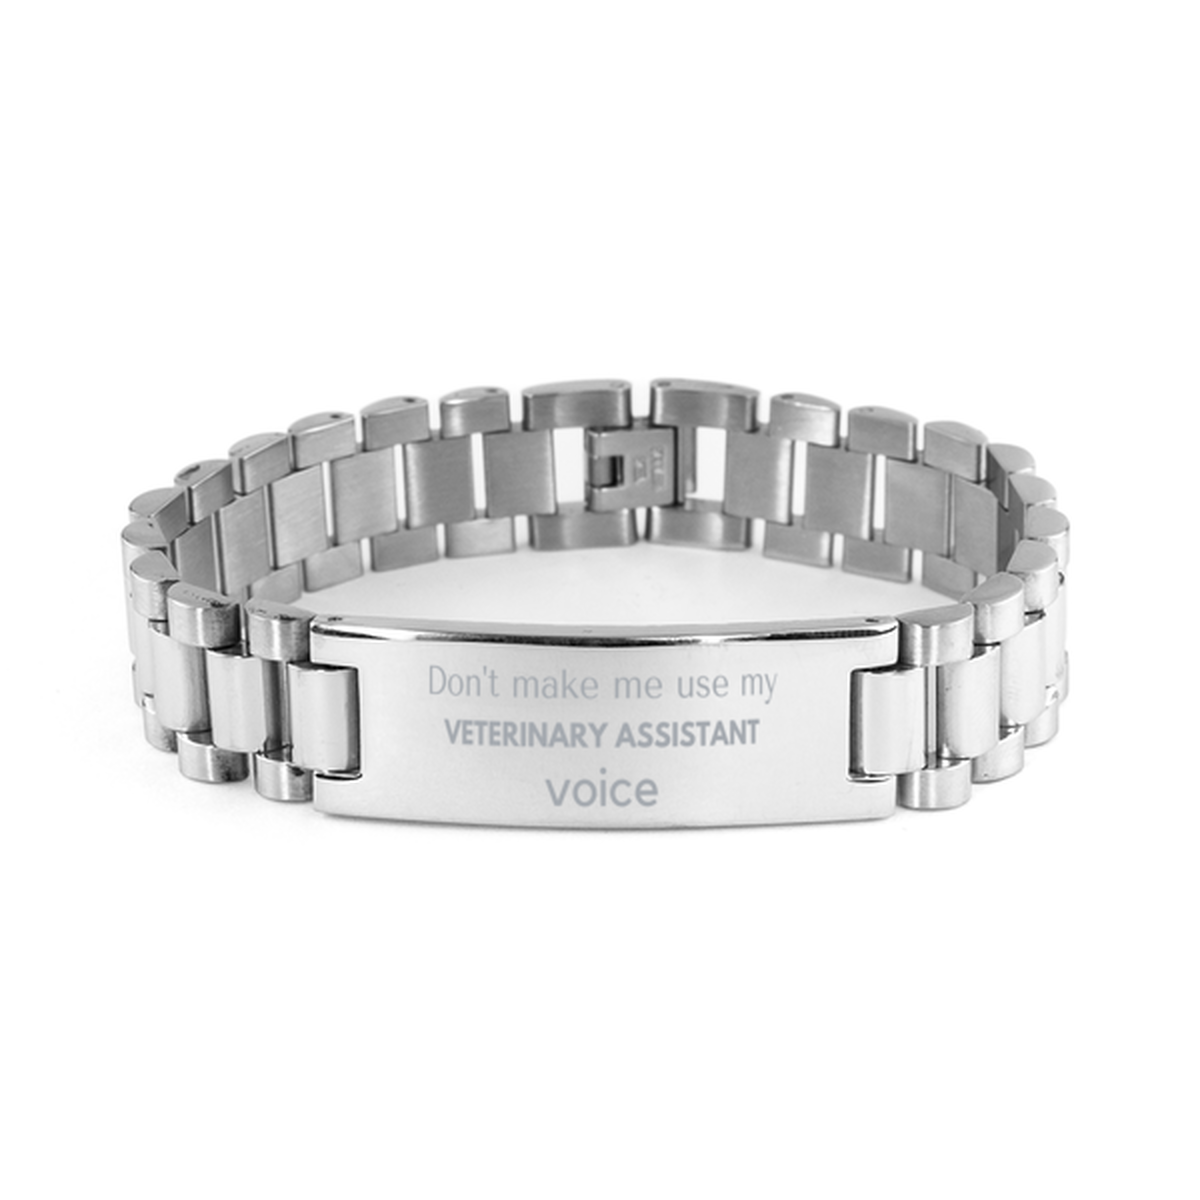 Don't make me use my Veterinary Assistant voice, Sarcasm Veterinary Assistant Gifts, Christmas Veterinary Assistant Ladder Stainless Steel Bracelet Birthday Unique Gifts For Veterinary Assistant Coworkers, Men, Women, Colleague, Friends